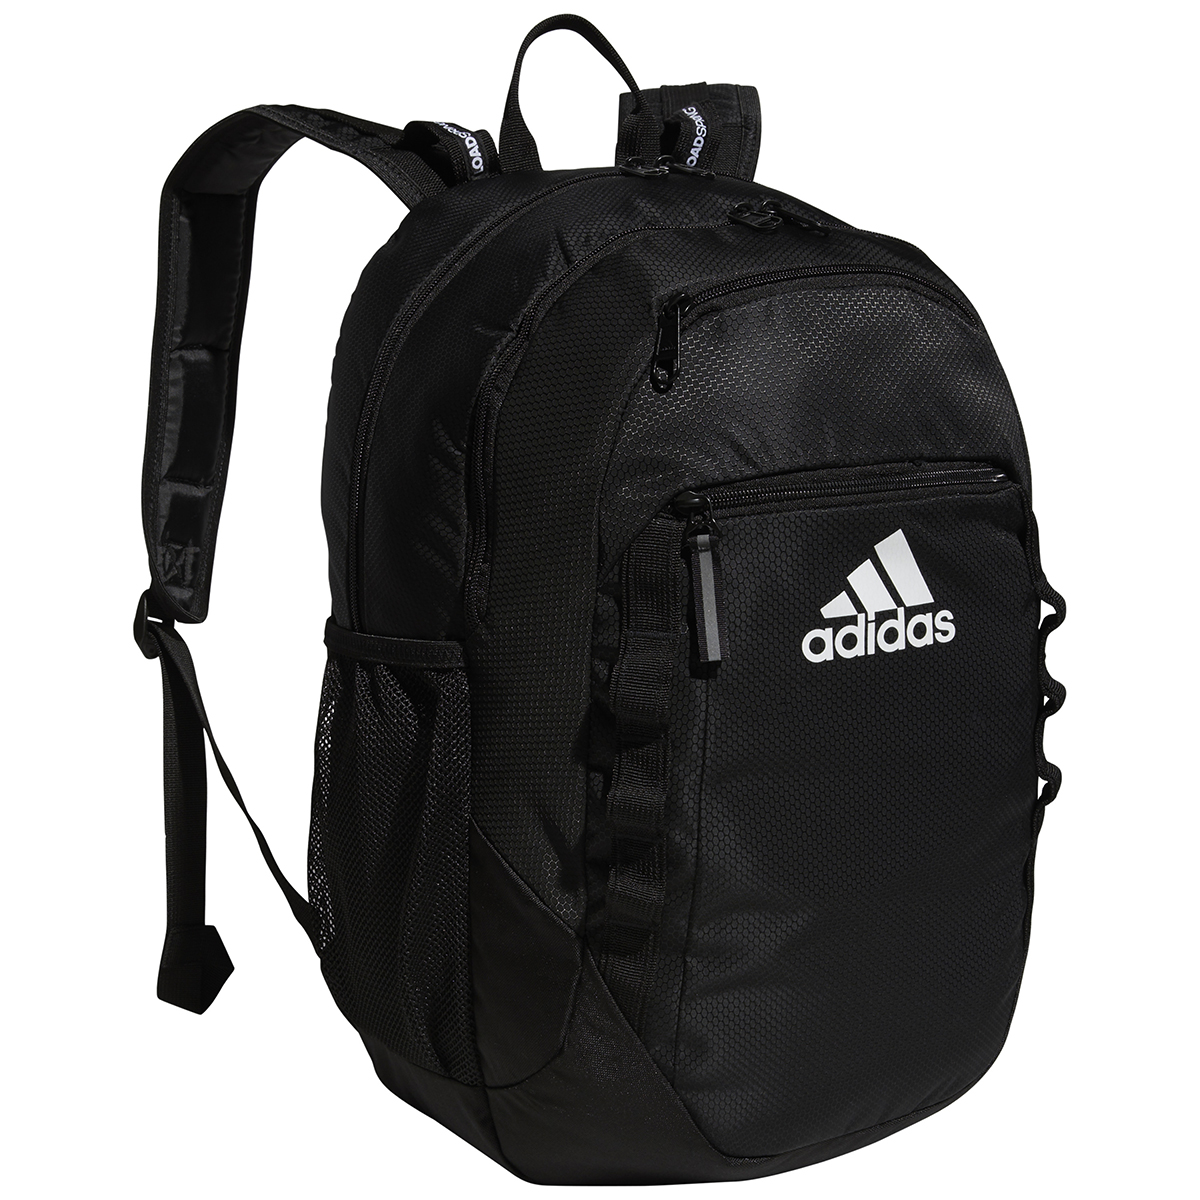 Adidas Excel 6 Backpack